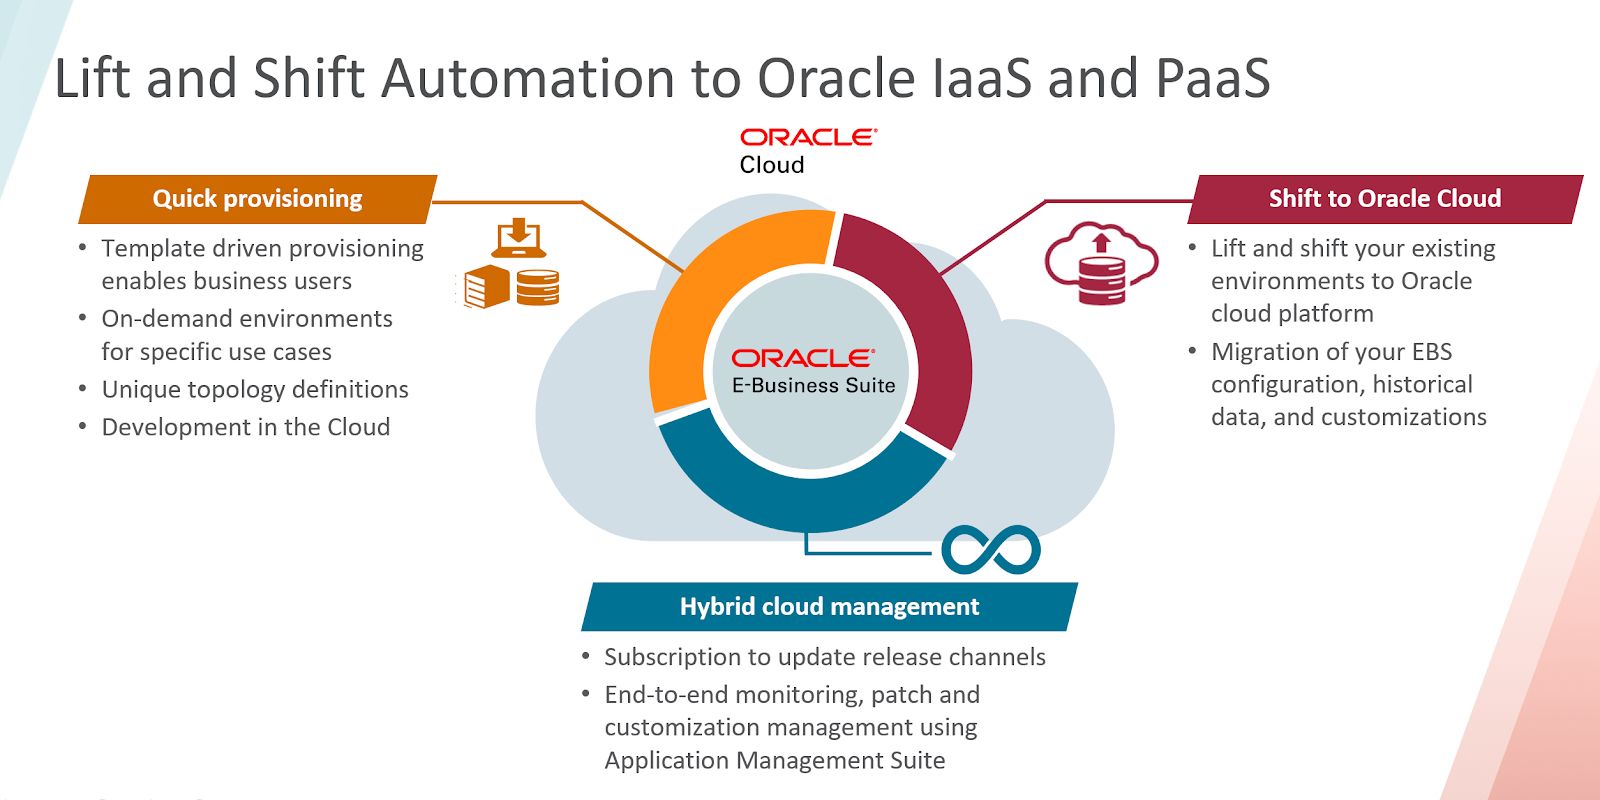 IaaS and PaaS Life and Shift Automation